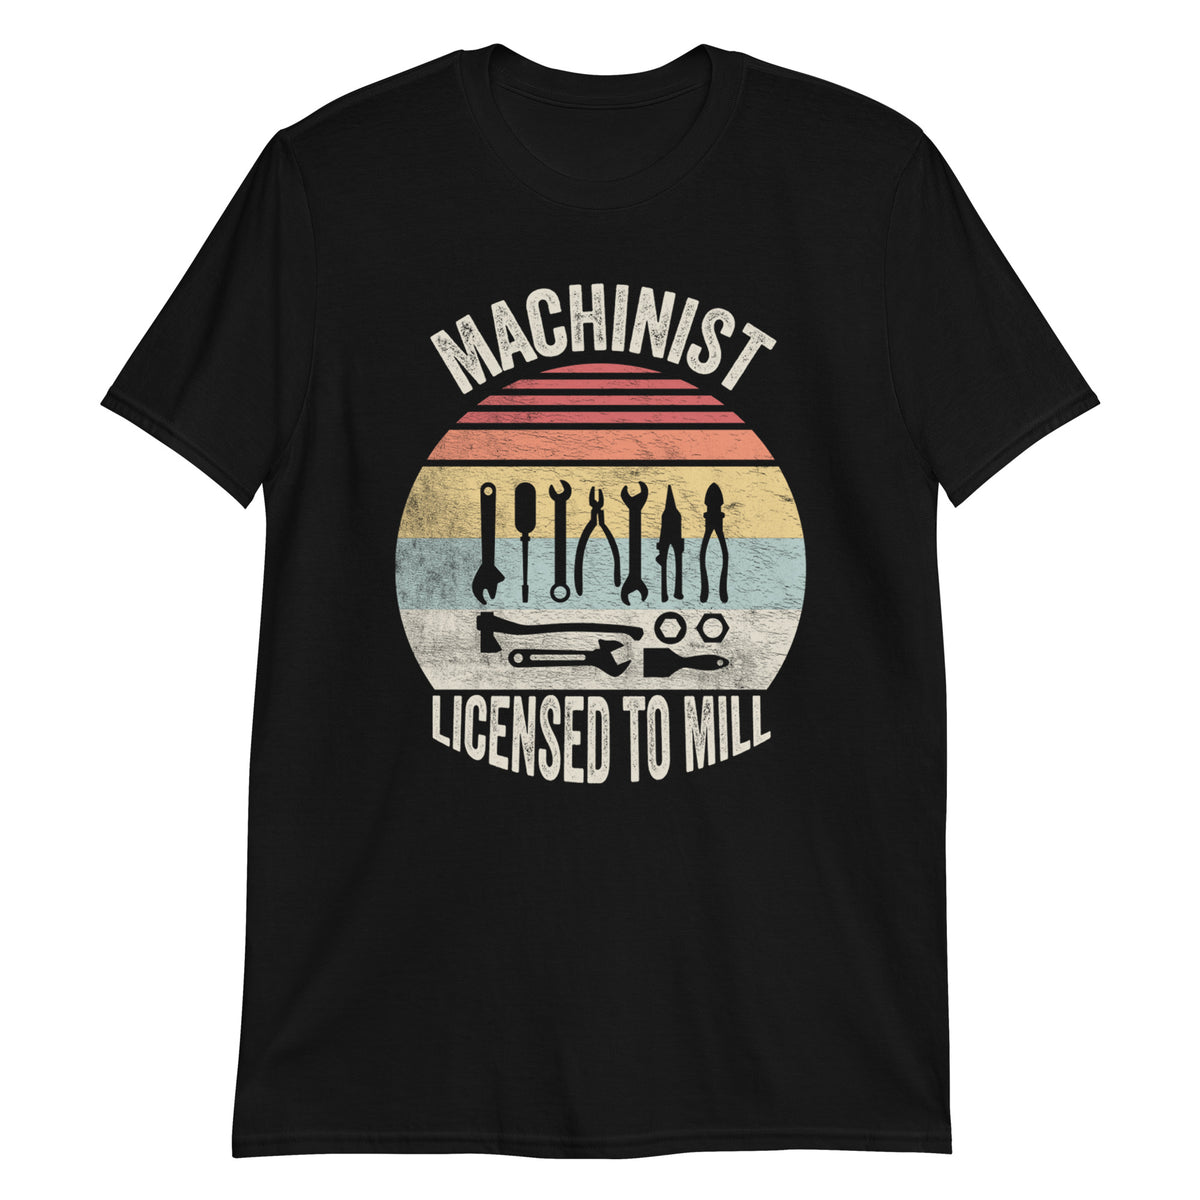 Machinist Licensed to Mill T-Shirt